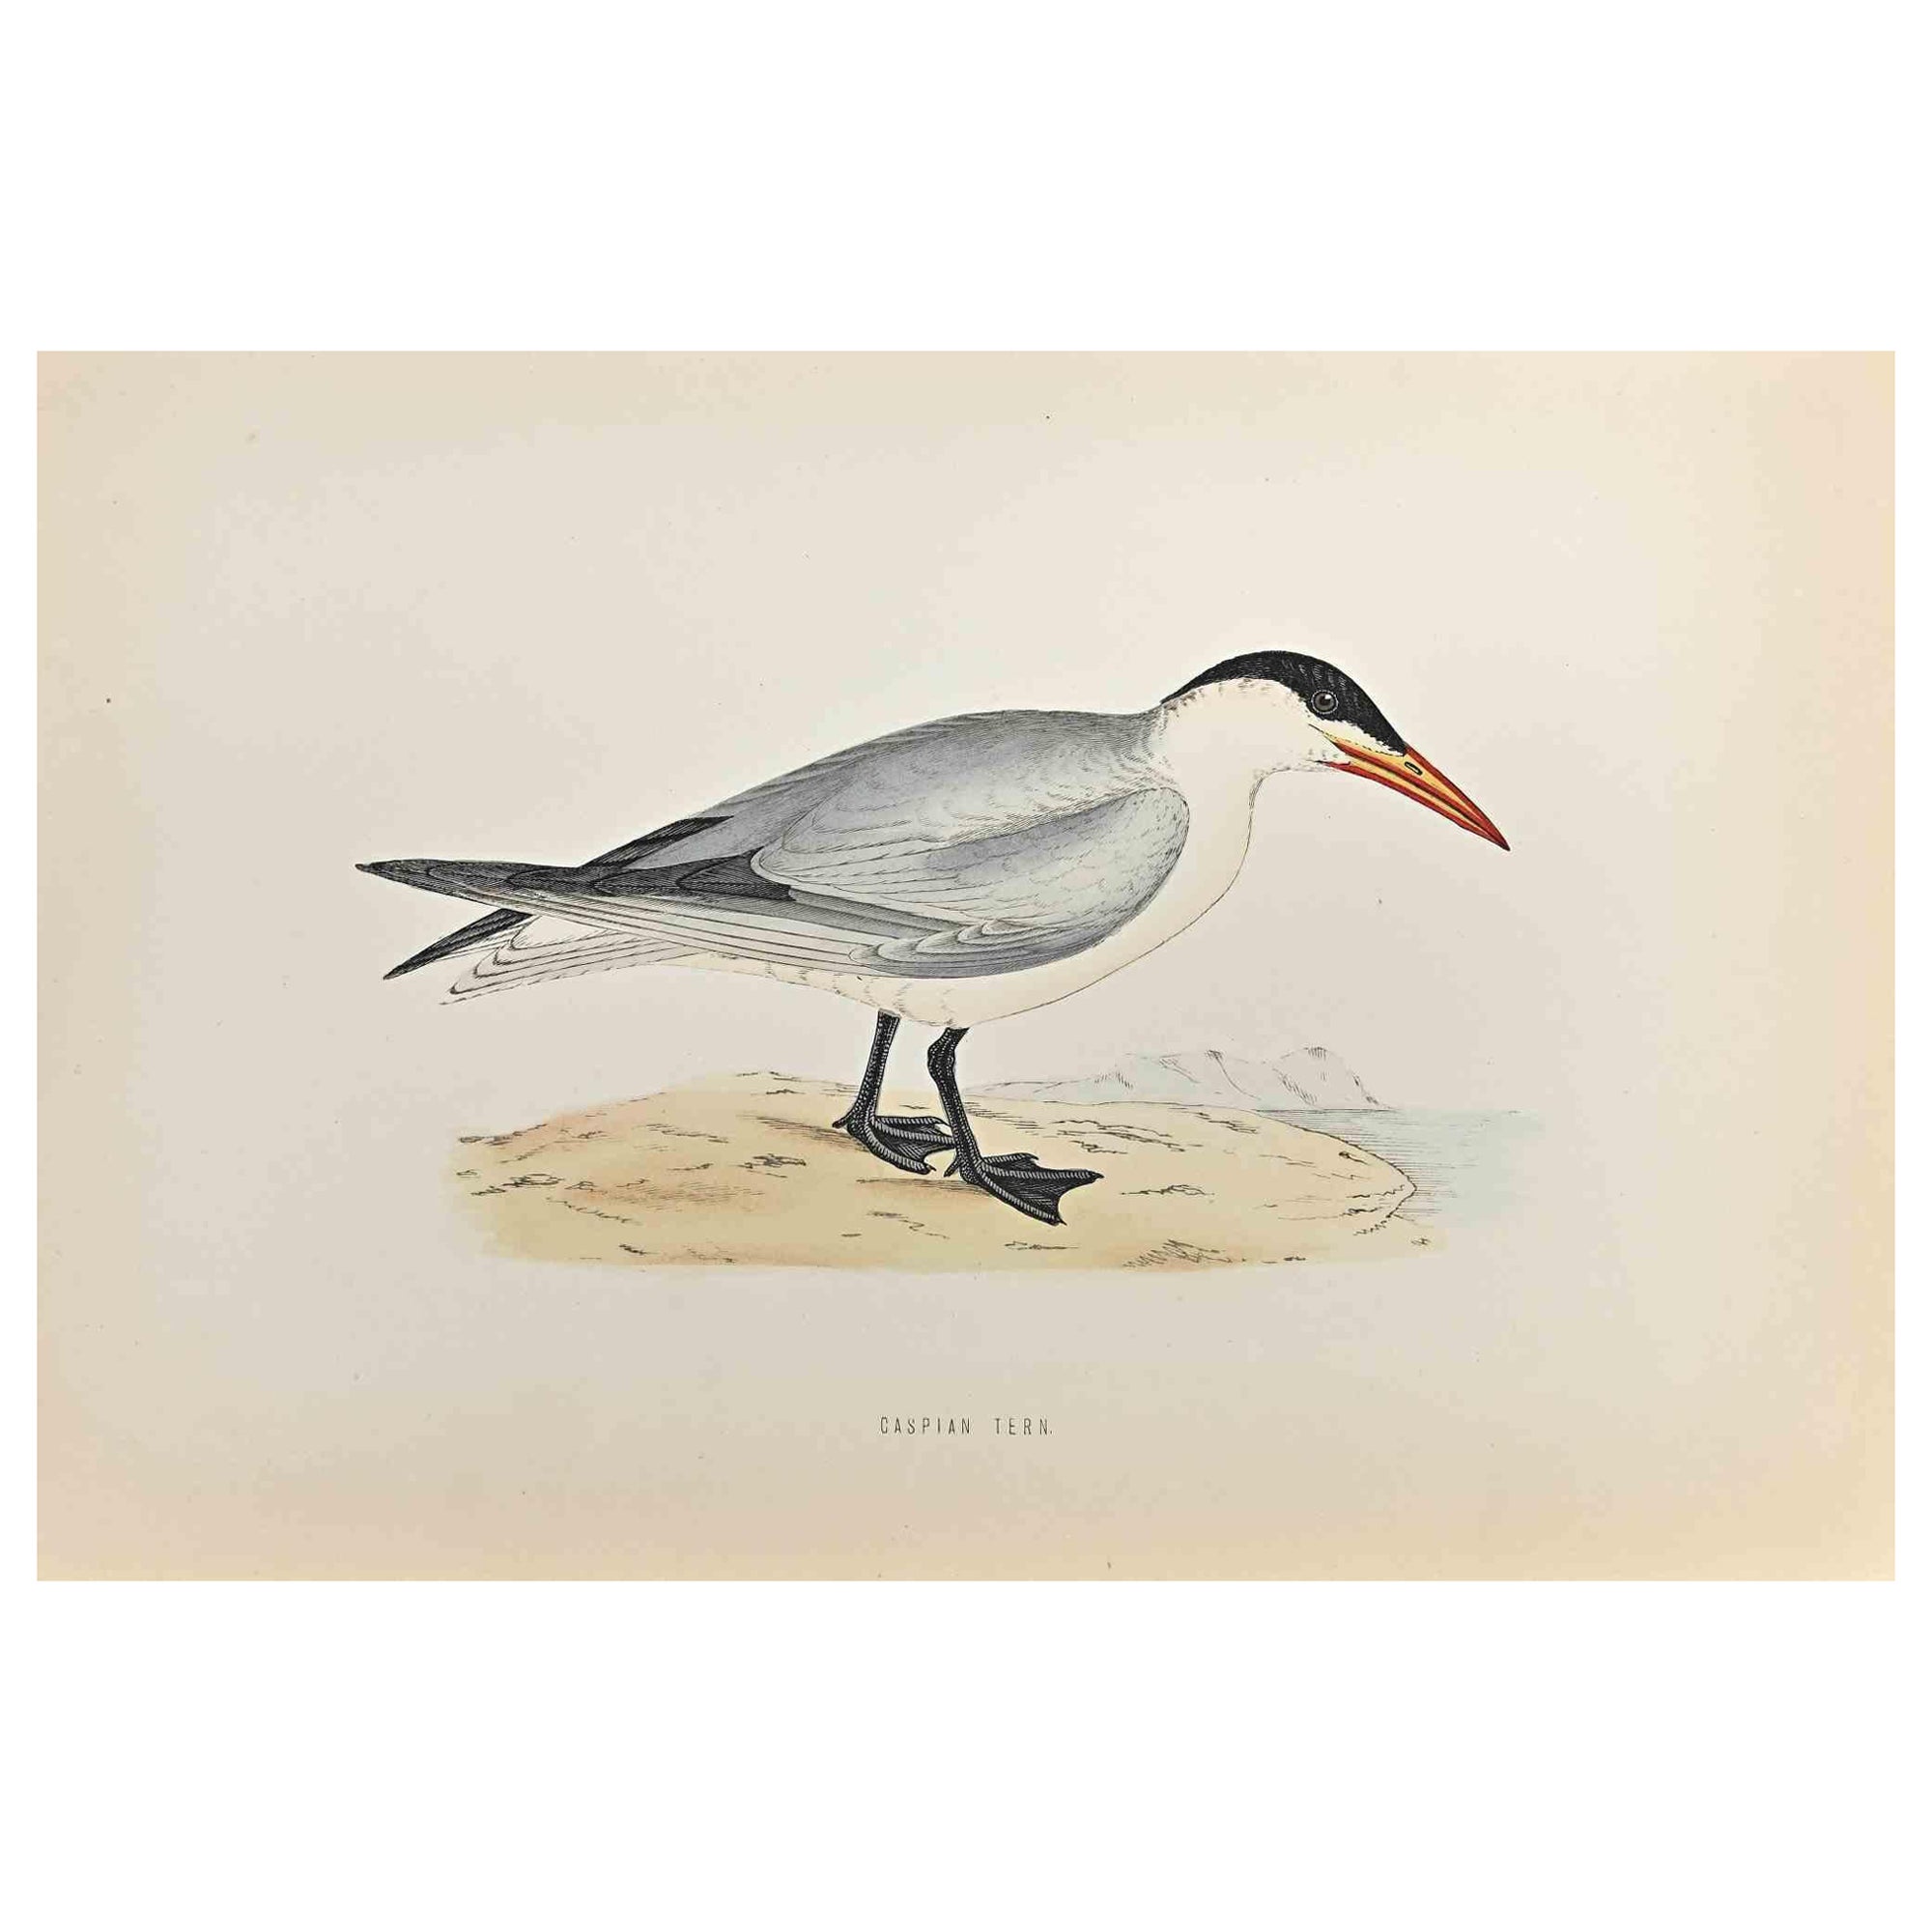 Caspian Tern is a modern artwork realized in 1870 by the British artist Alexander Francis Lydon (1836-1917) . 

Woodcut print, hand colored, published by London, Bell & Sons, 1870.  Name of the bird printed in plate. This work is part of a print